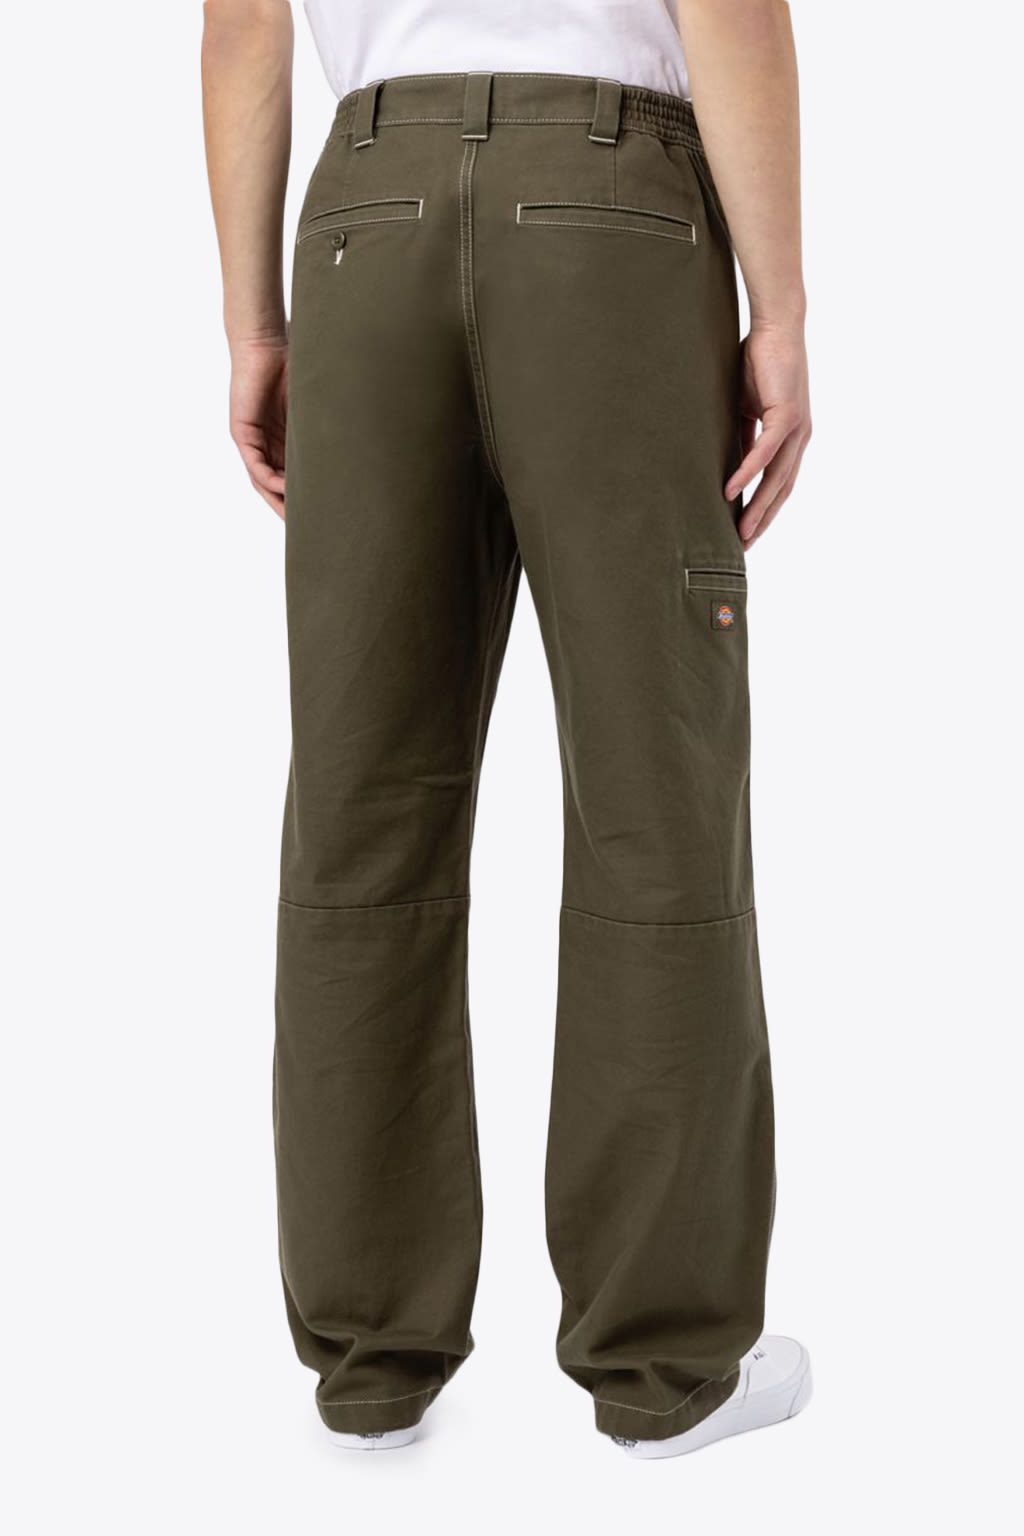 Shop Dickies Florala Pant Military Green Cotton Double Knee Work Pant - Florala Pant In Army Green